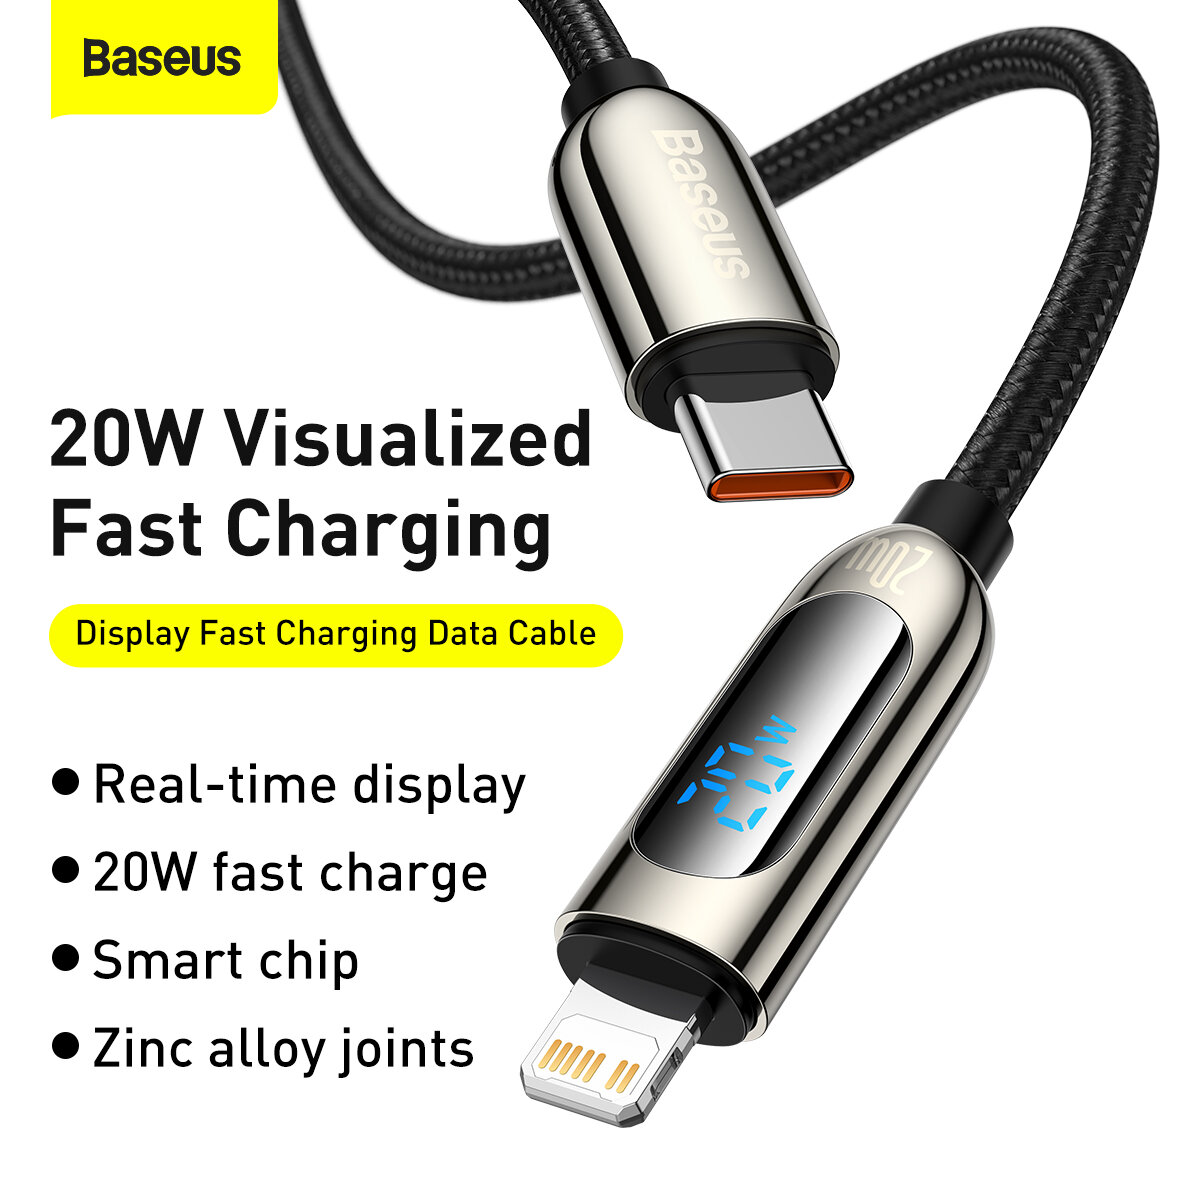 Baseus 20W PD Visualized Real-Time Display Type-C to iP Fast Charging Data Cable for iPhone 12 Min for iPhone 12 Pro Max 11 Pro XR 8 for iPad 9 Air 3